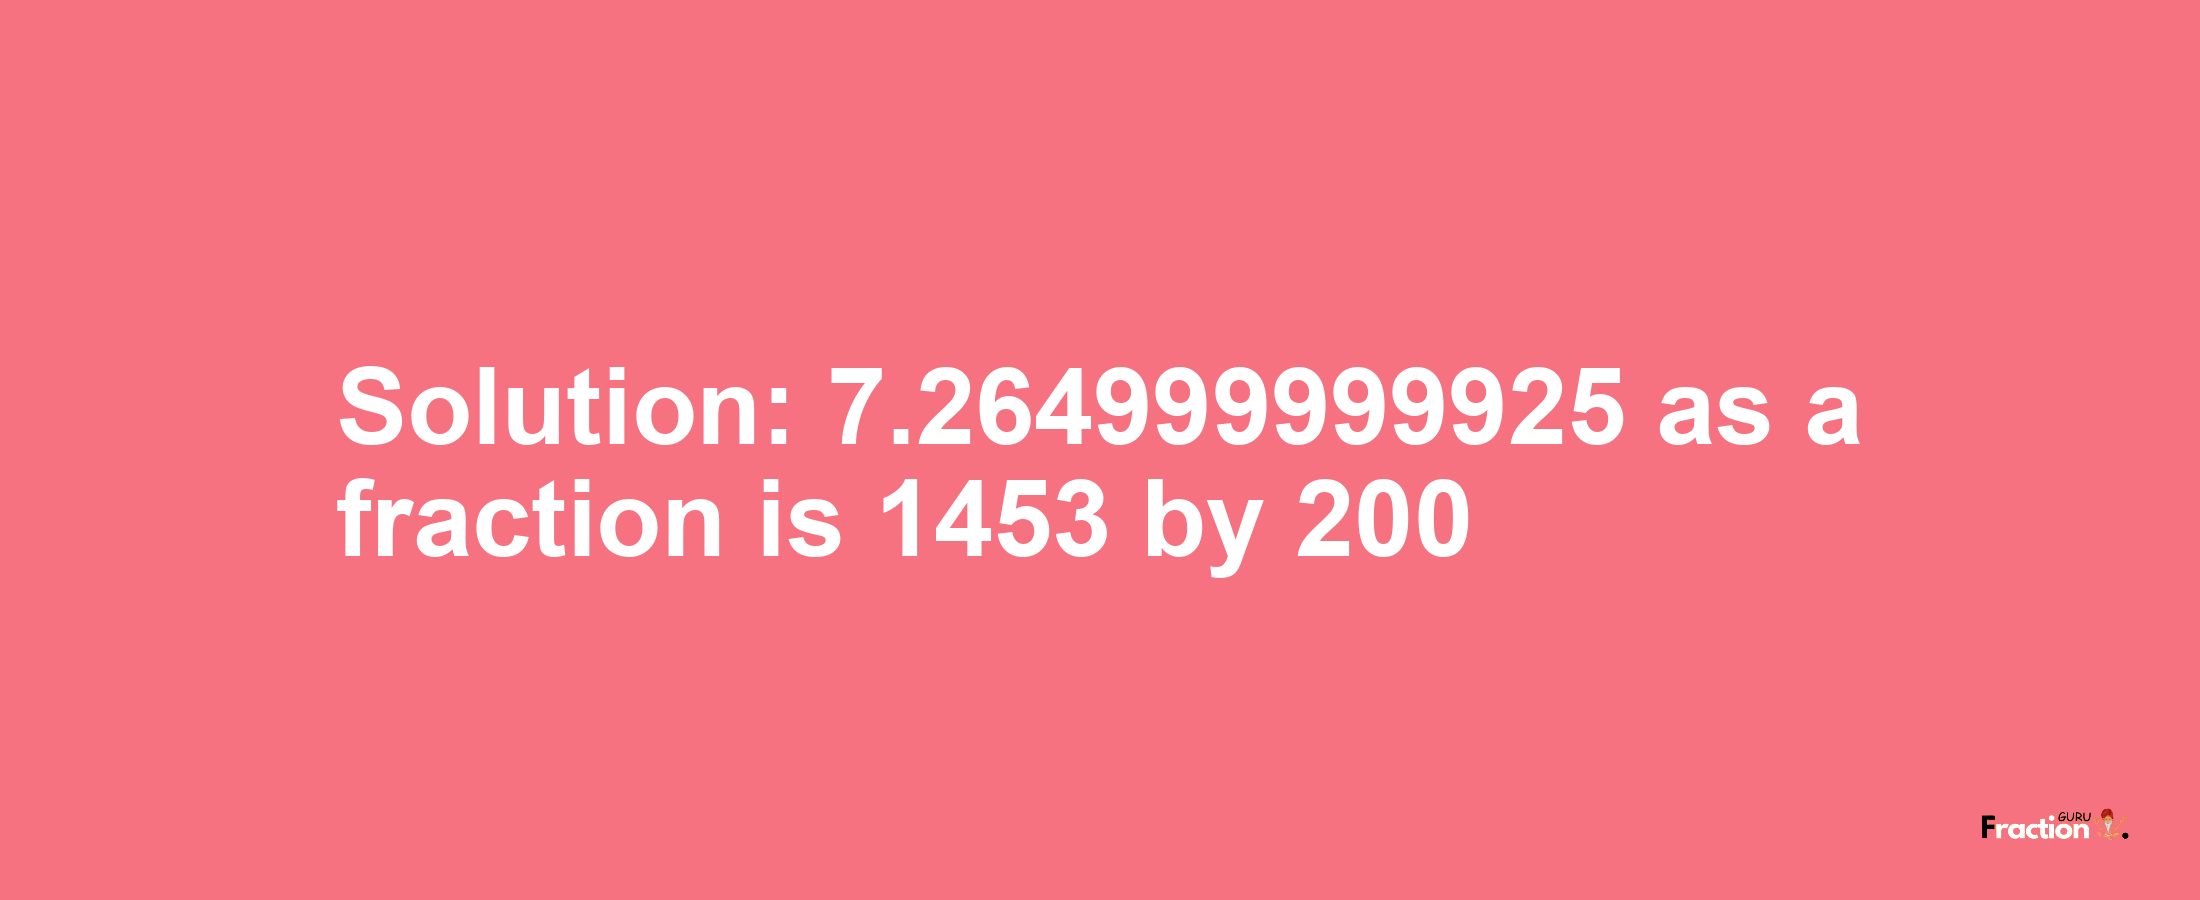 Solution:7.264999999925 as a fraction is 1453/200